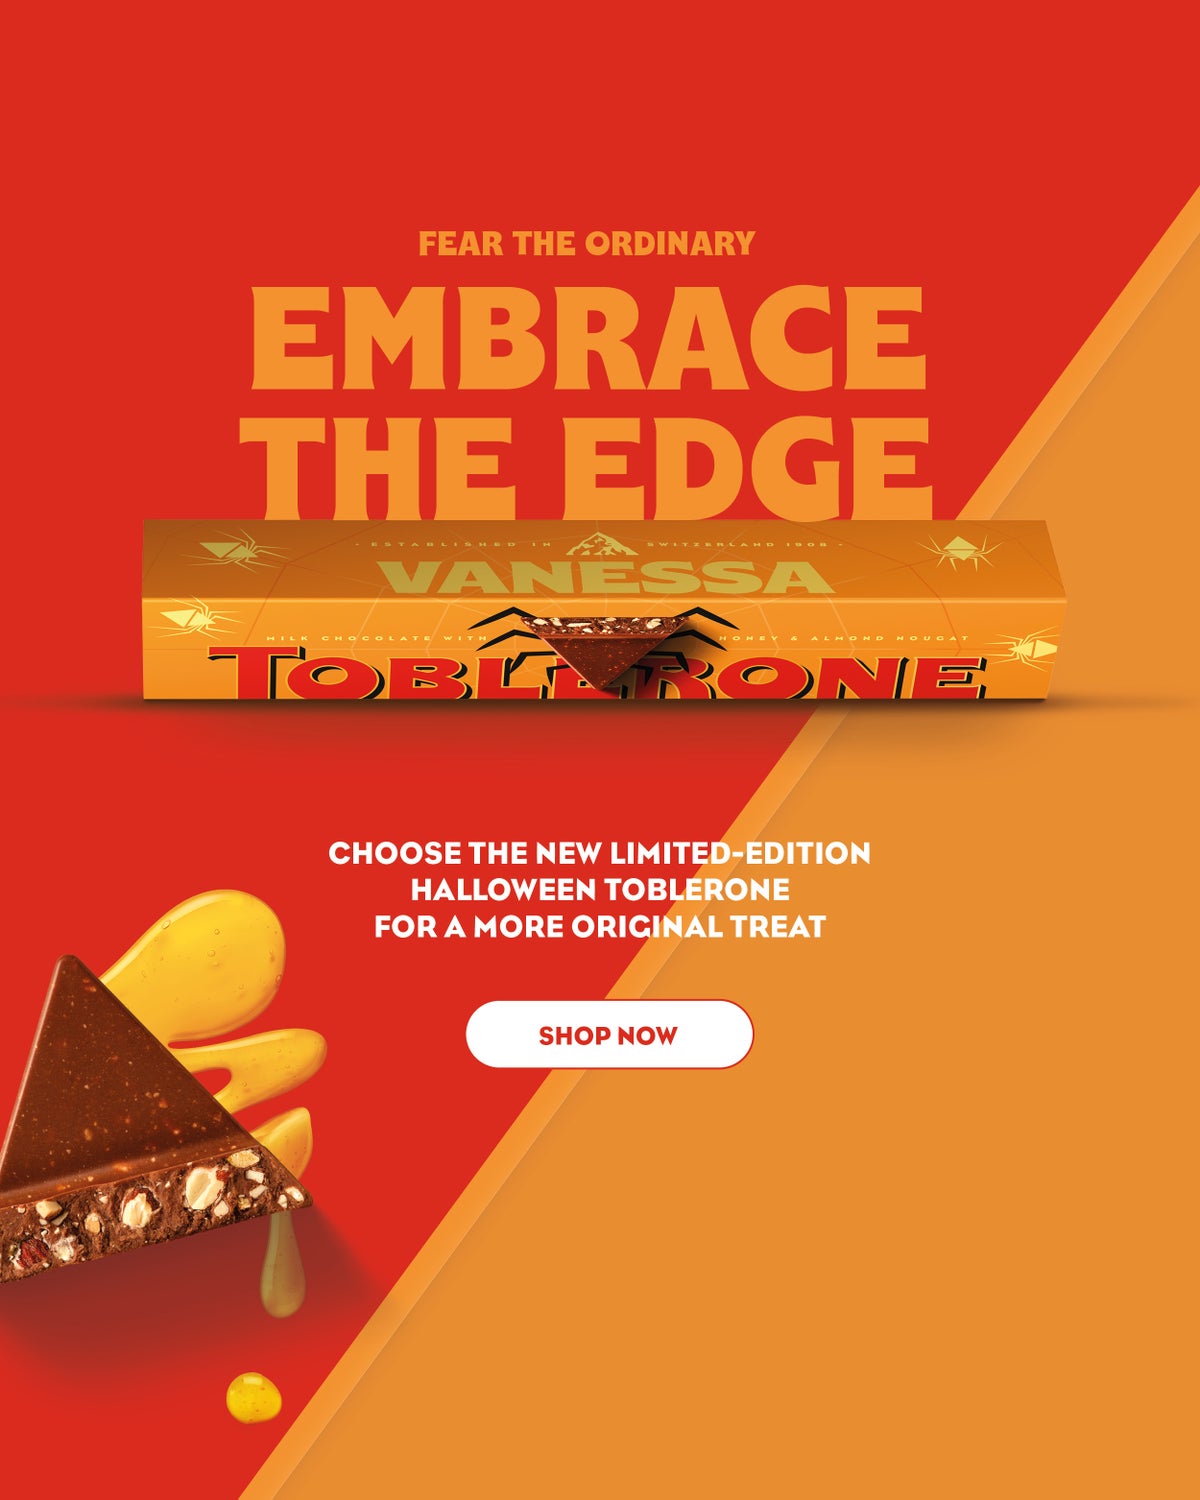 Choose the new limited-edition Halloween Toblerone for a more original treat